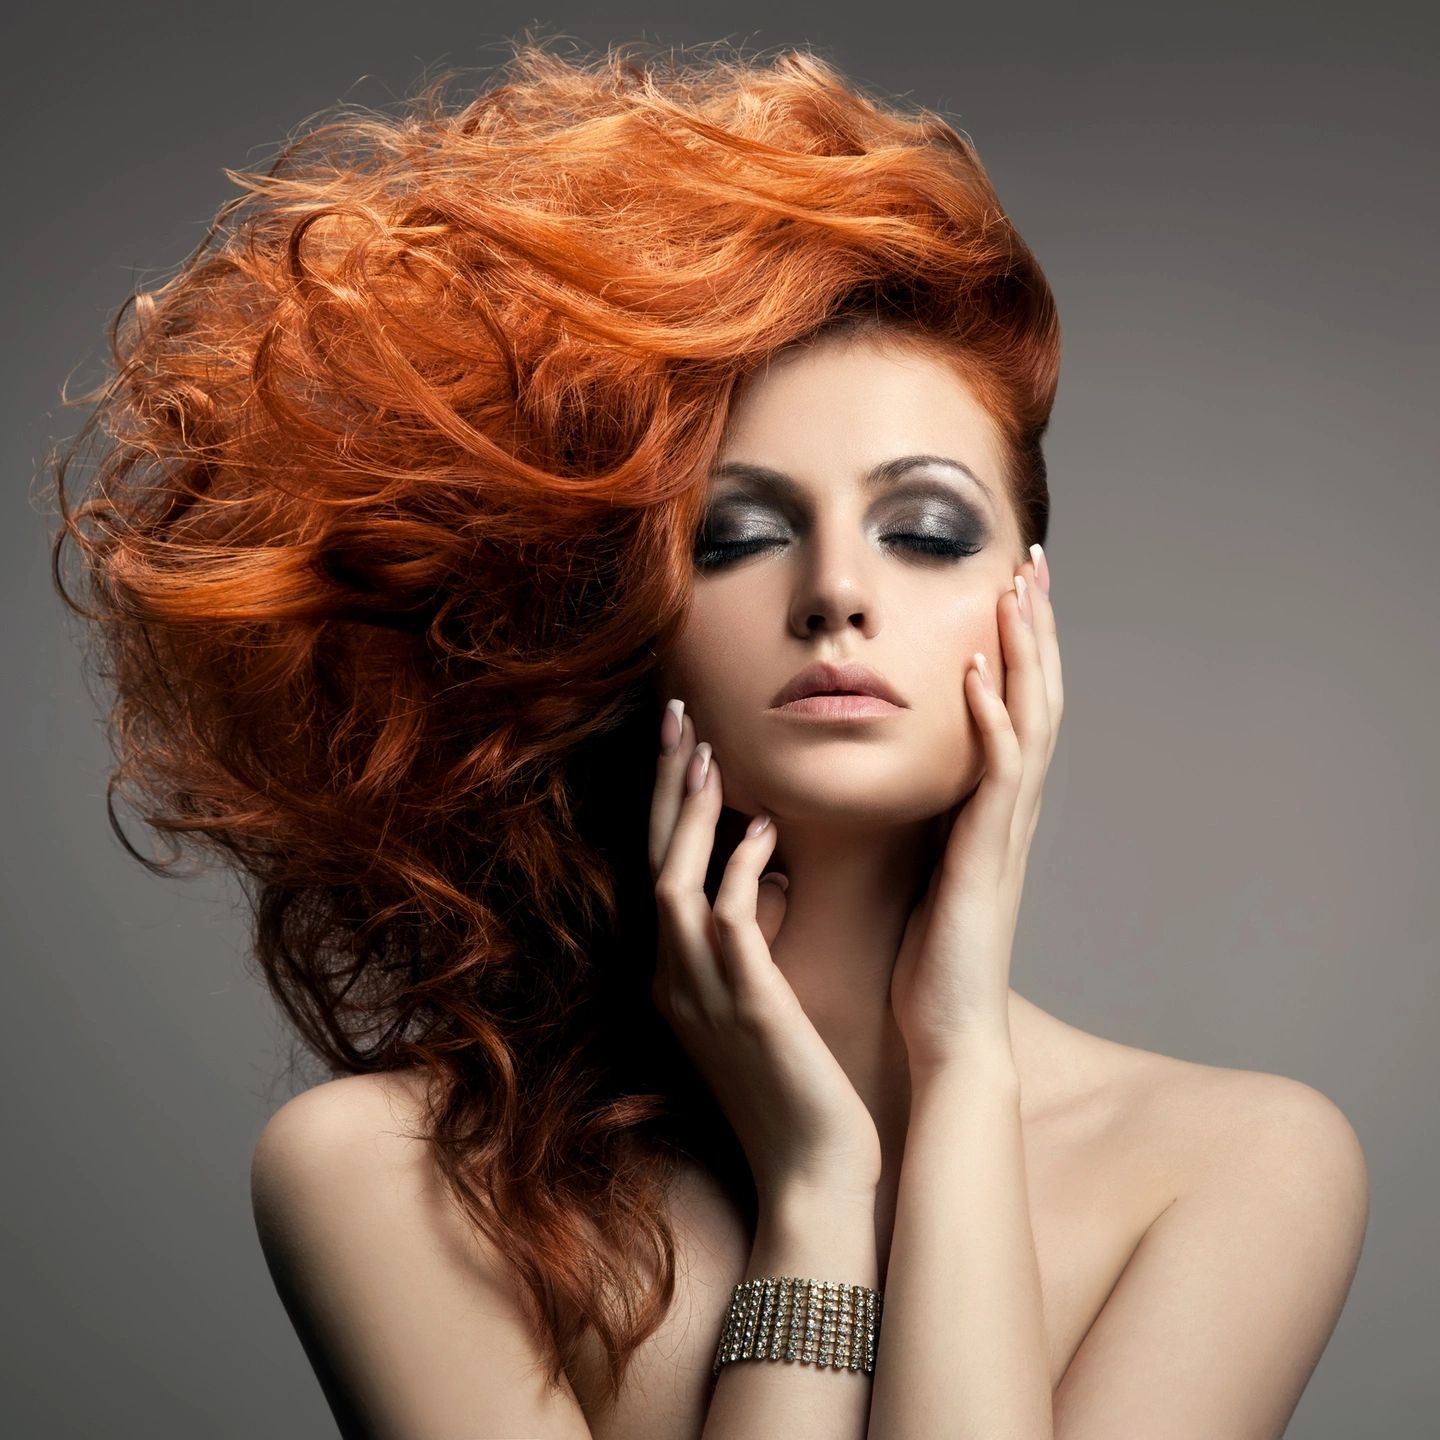 Face of female model with beautiful red hair and makeup.